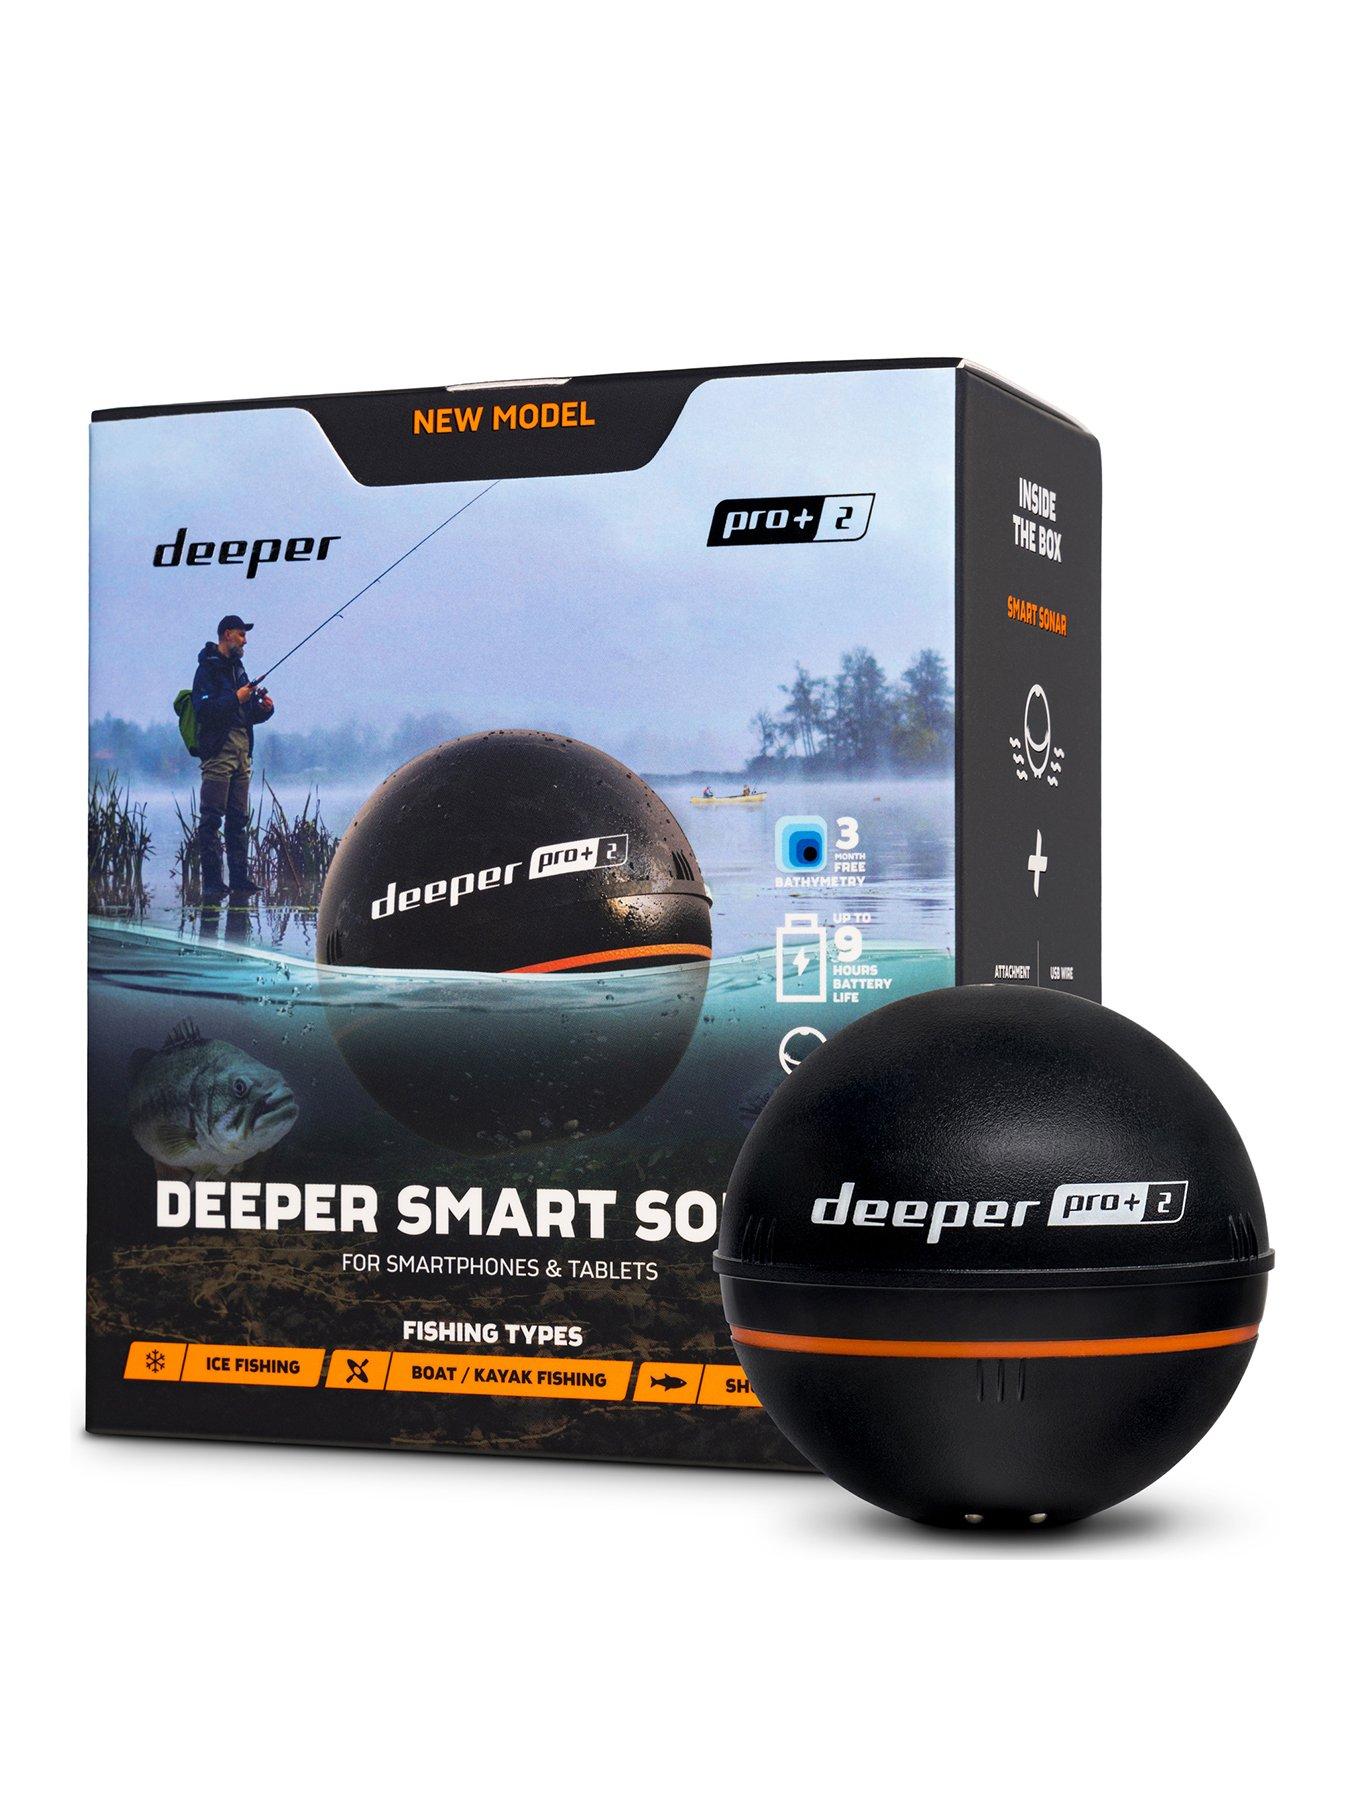 Deeper Sonar Deeper Smart Sonar Pro+ With Gps For Professional Fishing